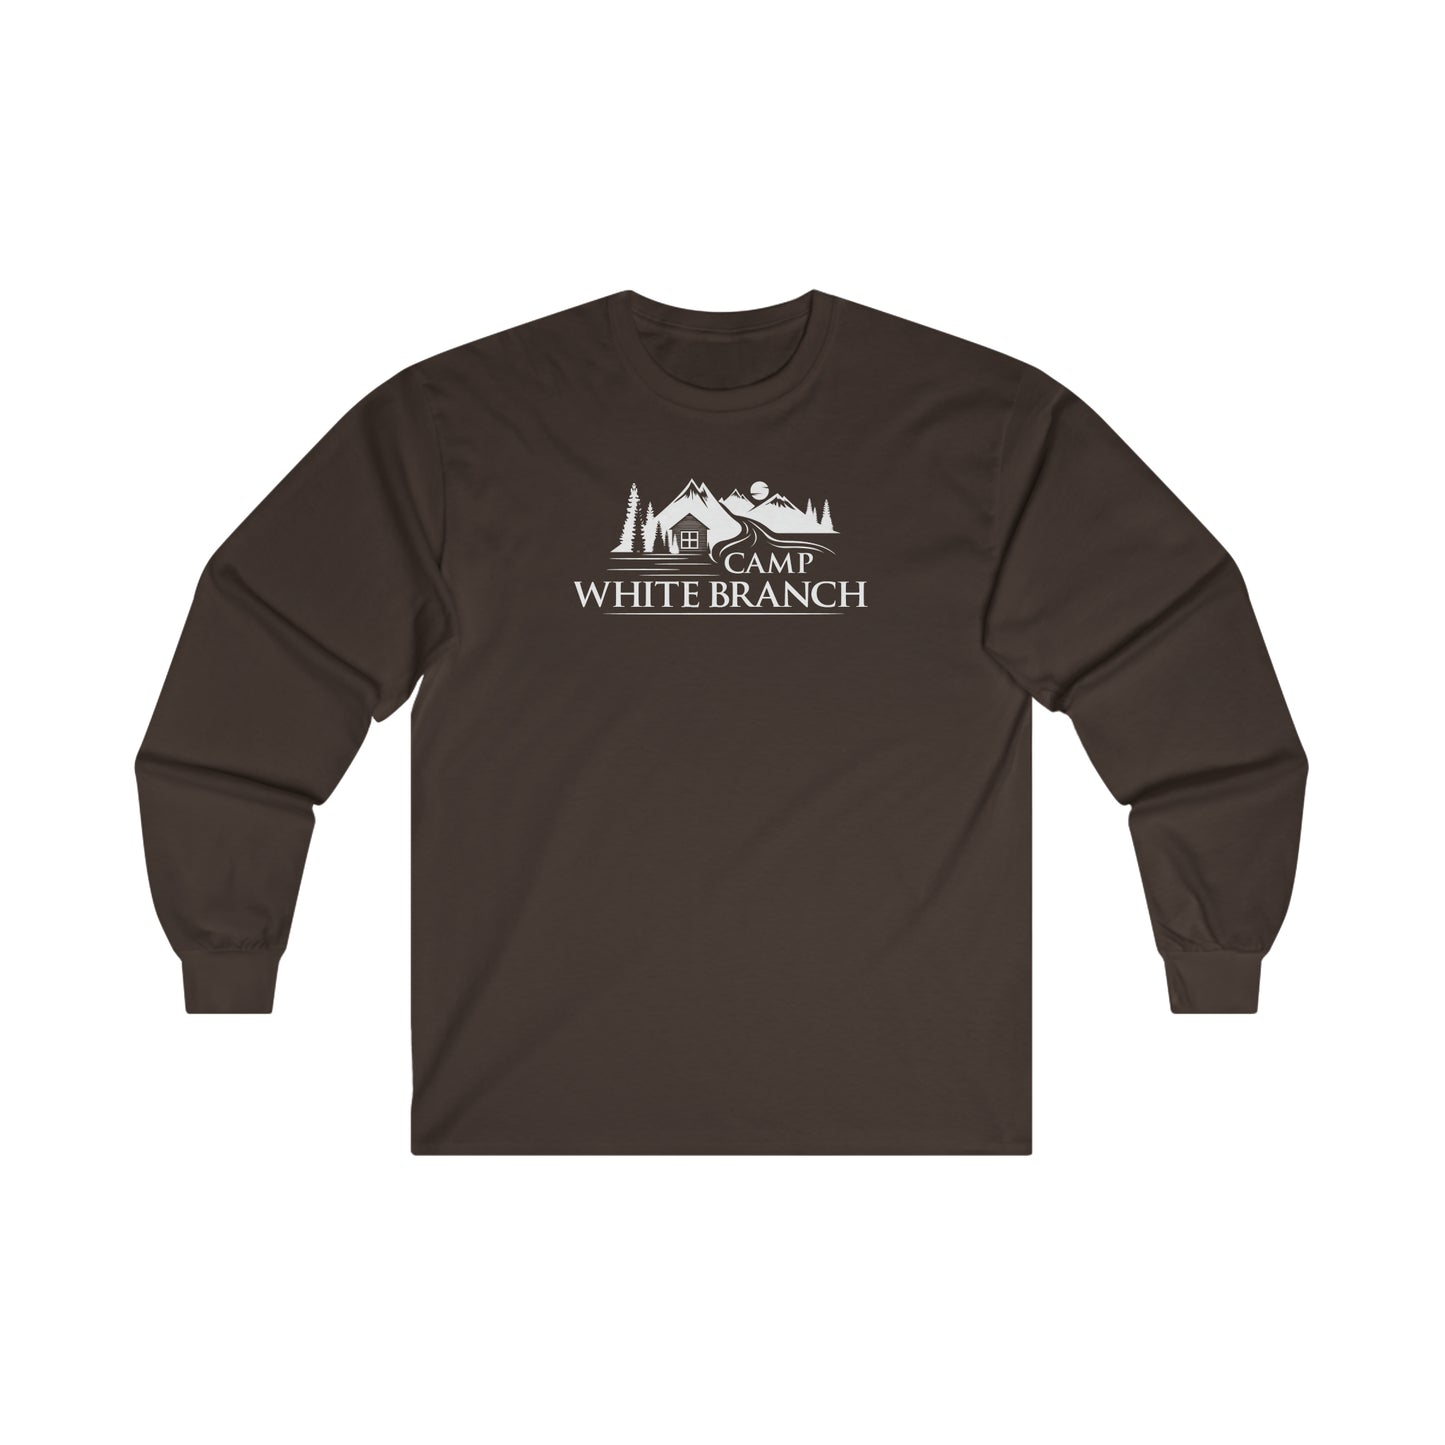 Camp White Branch Long Sleeve Tee